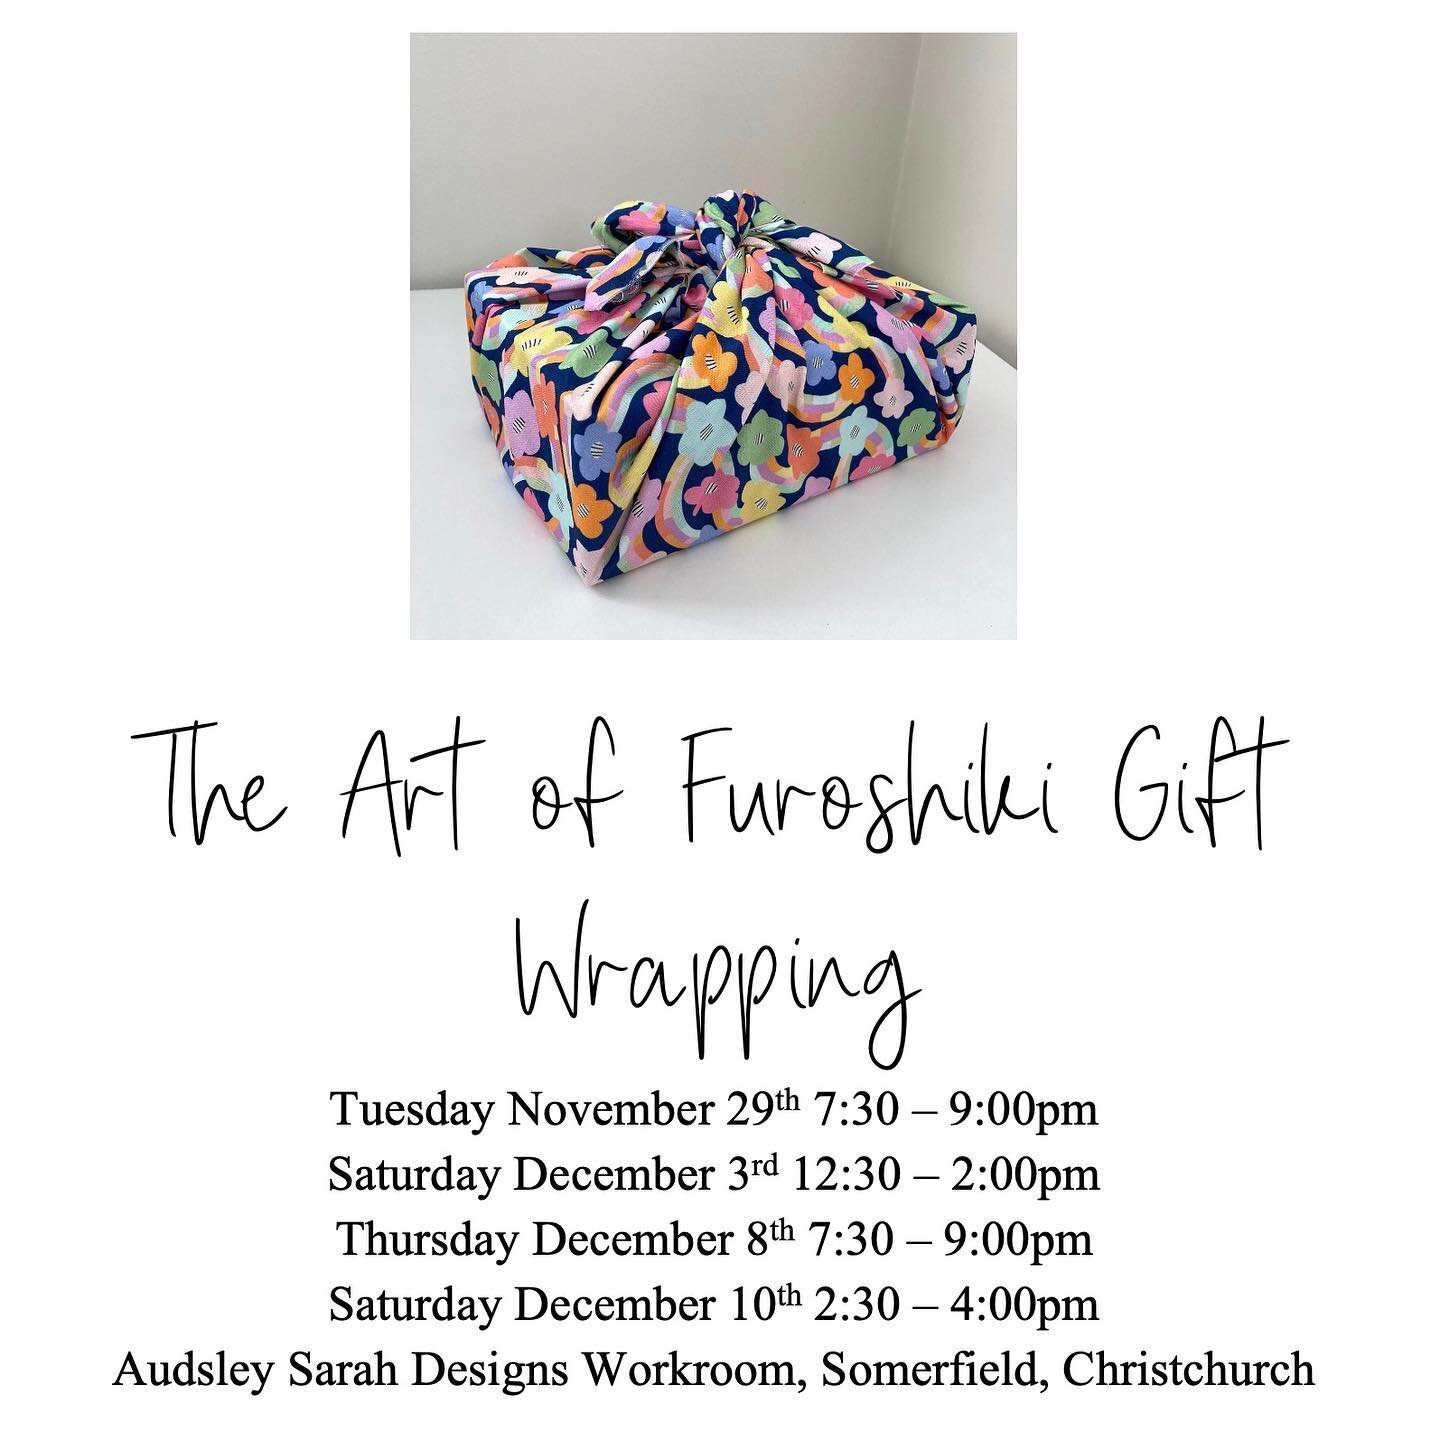 Christmas Classes are LIVE
There are three classes to choose from 
- the art of Furoshiki gift wrapping 
- learn to quilt, stocking edition and 
- Christmas wreath making with two options, felt leaves of pompom!

Head over to audsleysarah.com to regi